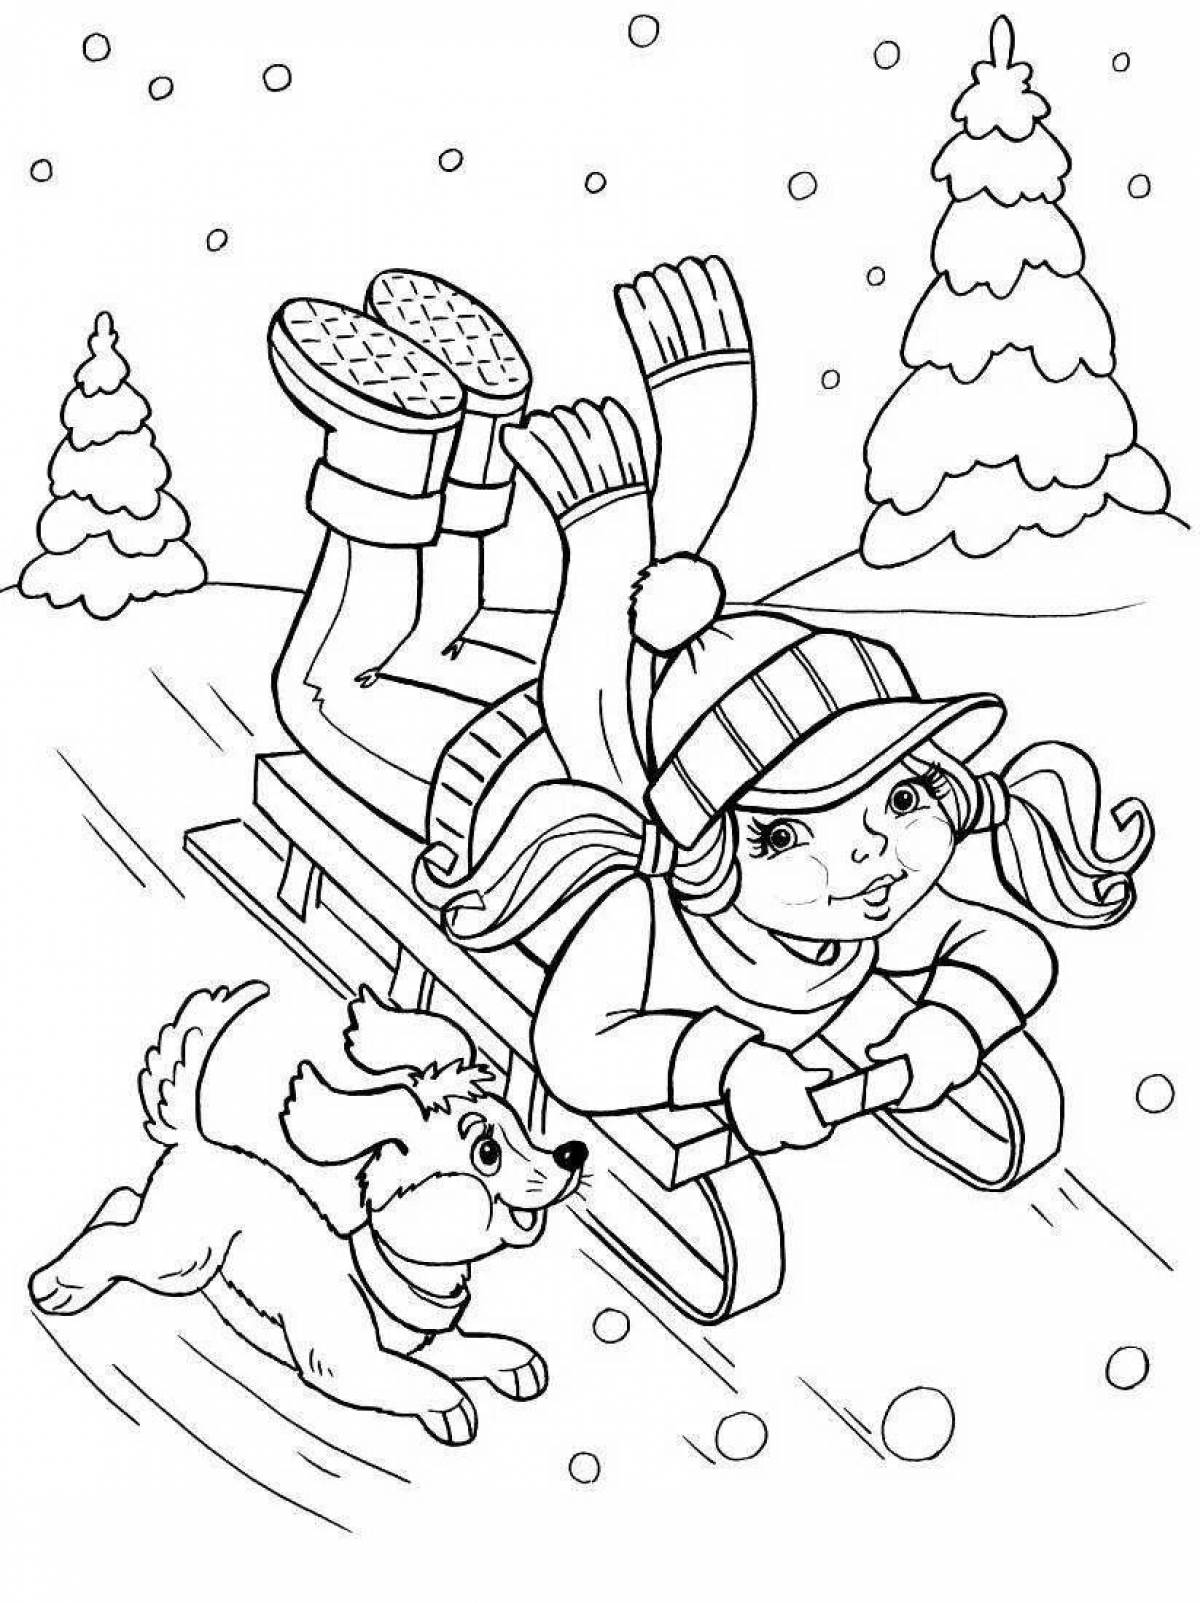 Glitter winter coloring book for kids 4 5